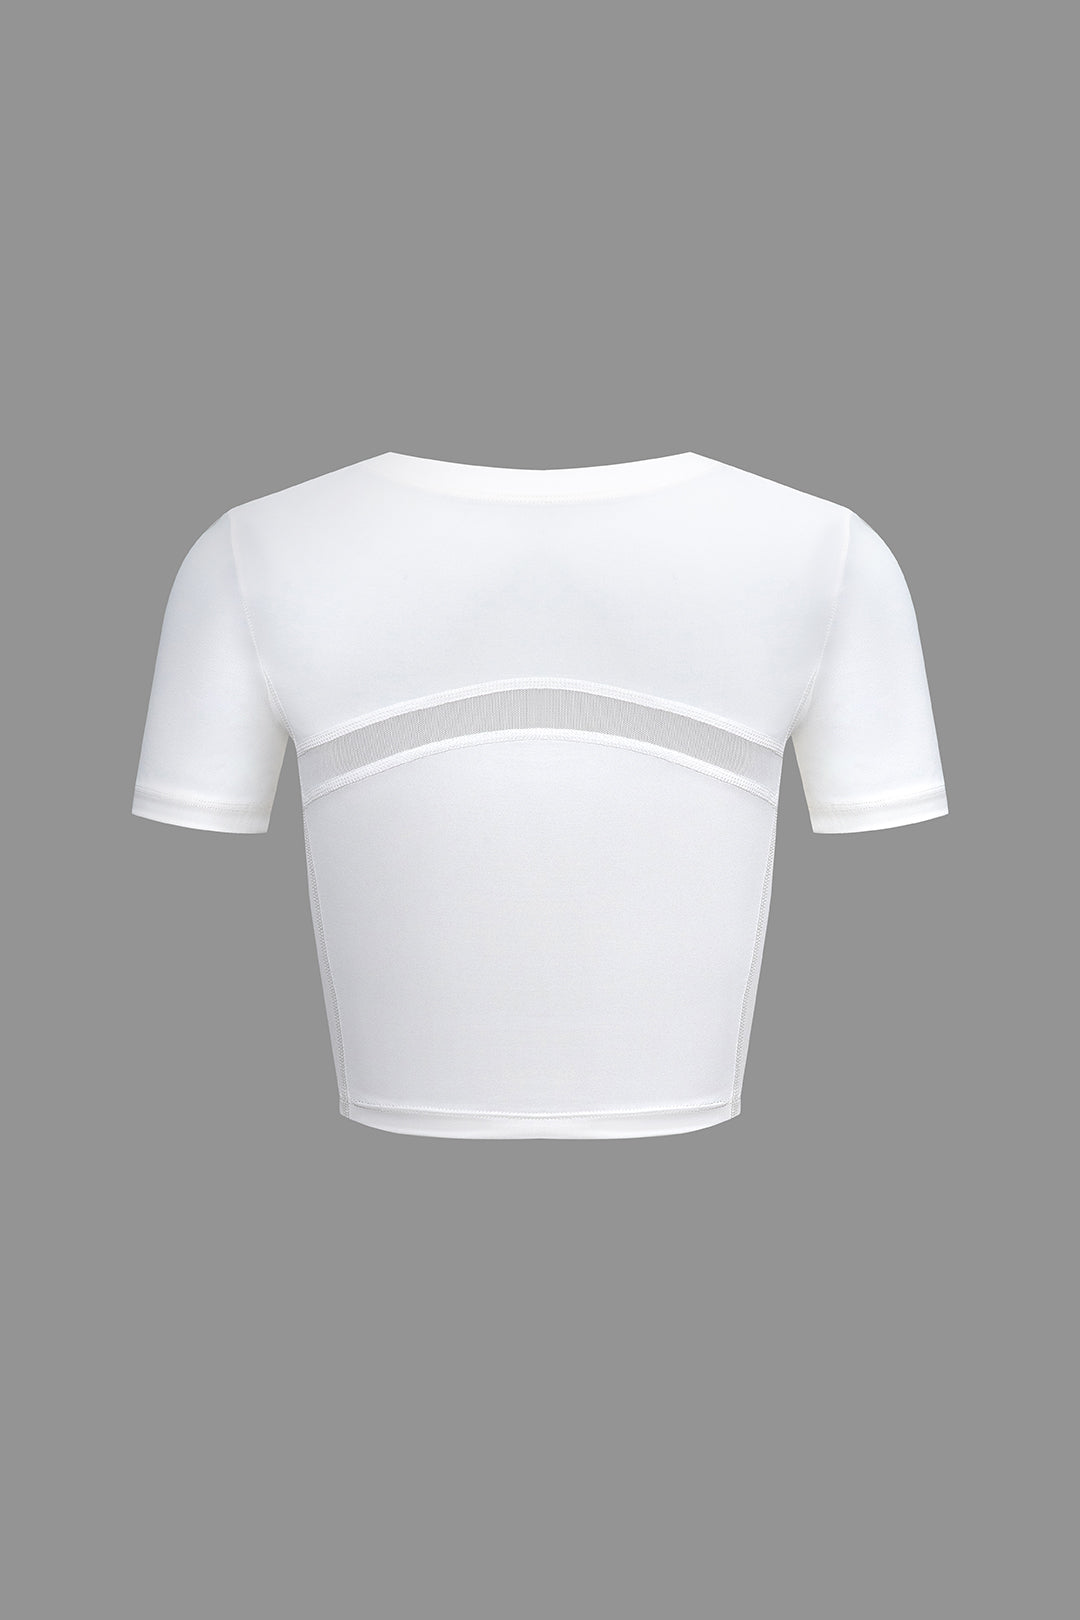 Solid Sports Short-Sleeve Top